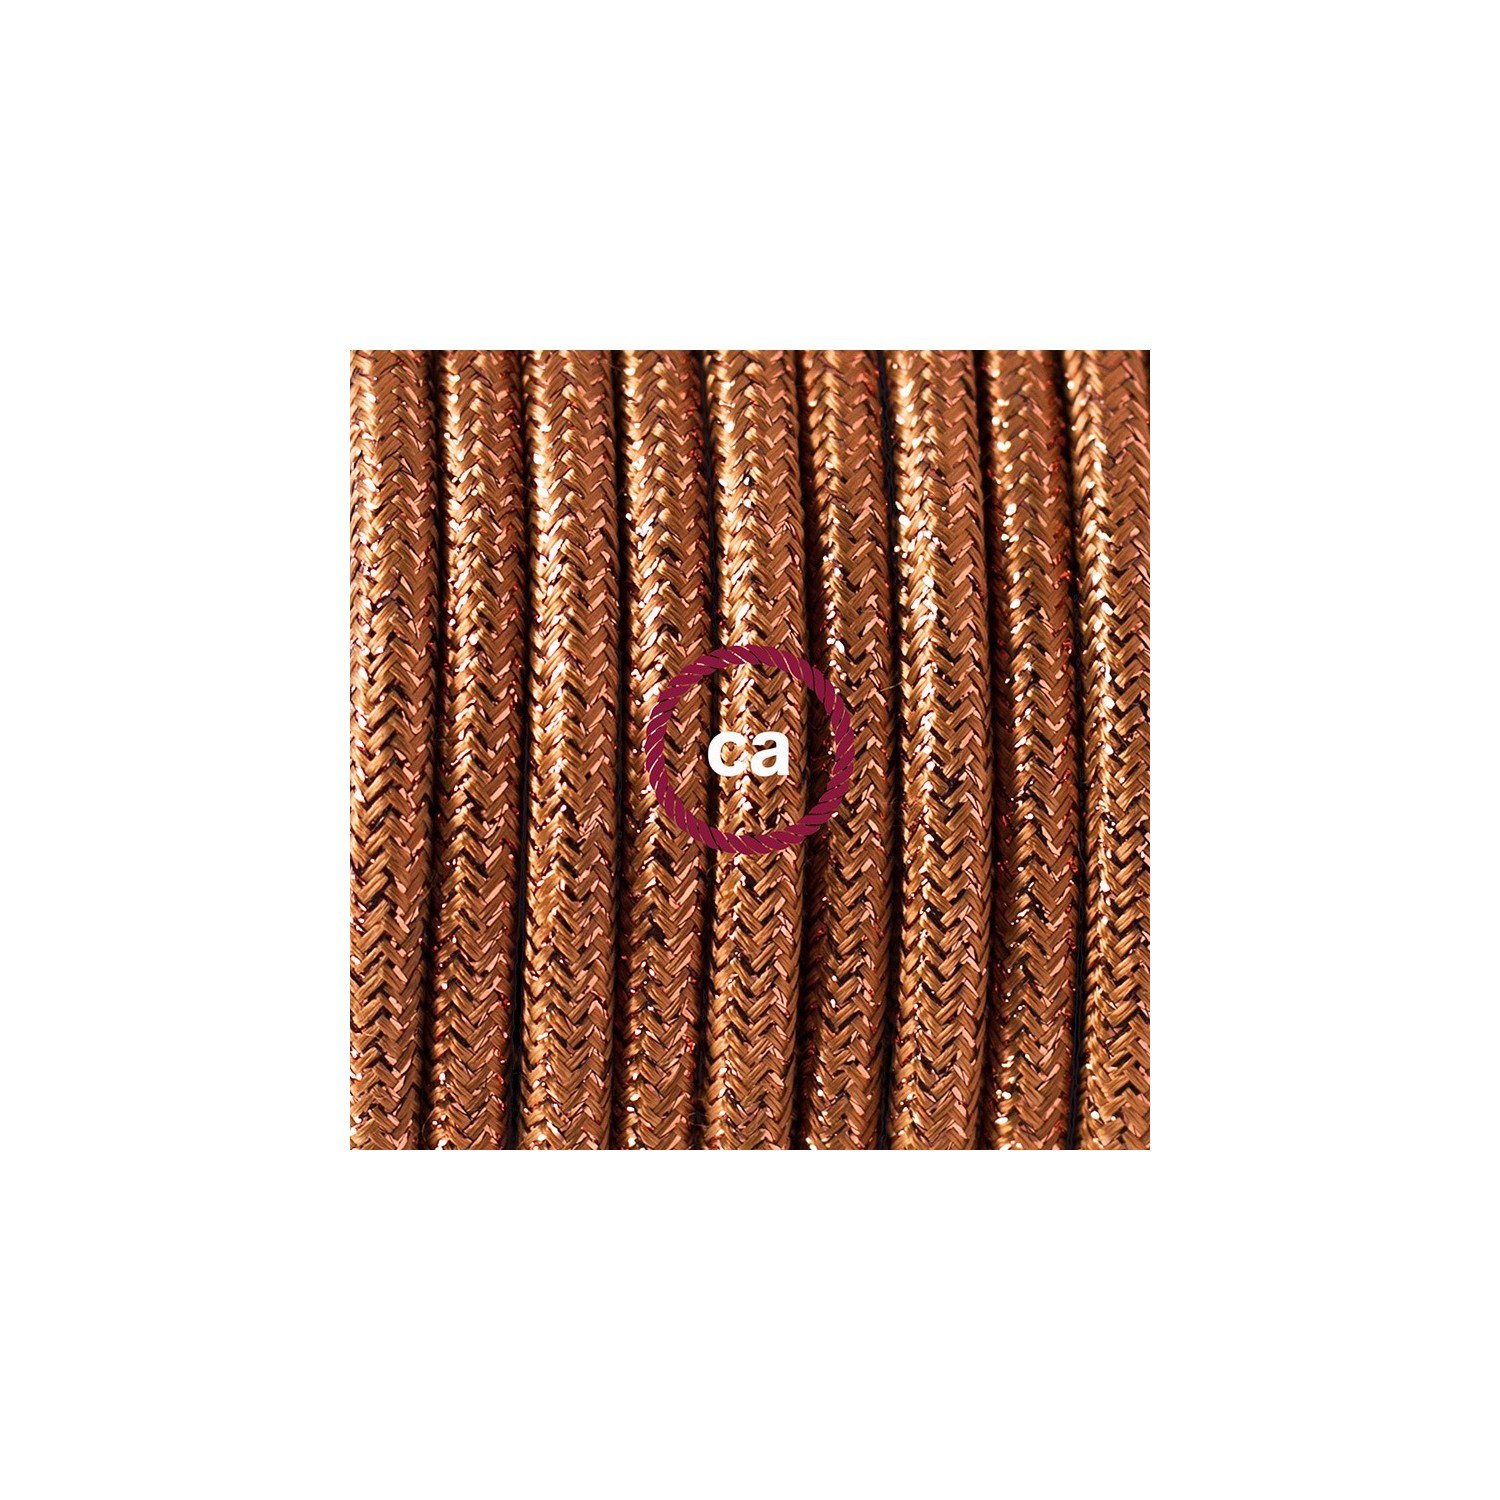 Wiring Pedestal, RL22 Sparkly Copper Rayon 3 m. Choose the colour of the switch and plug.